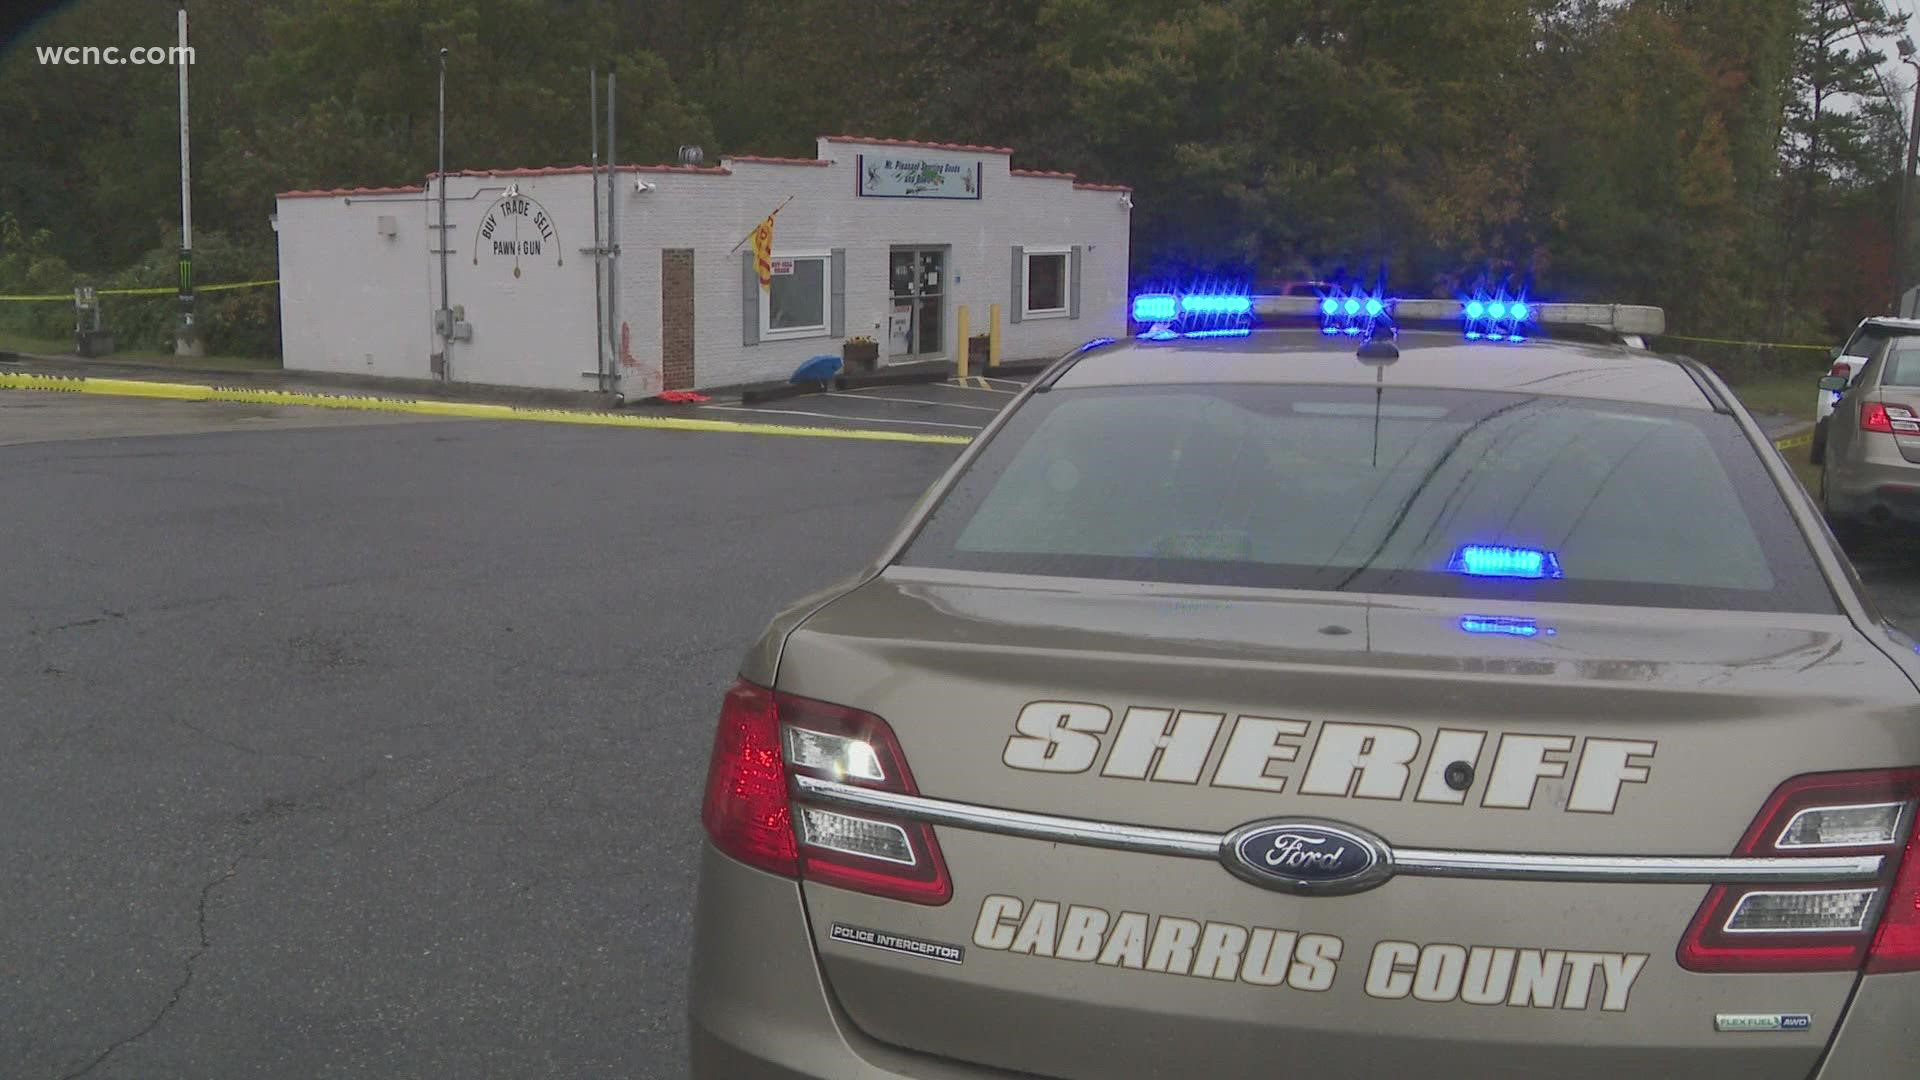 An off-duty officer opened fire at a group of suspects accused of shooting a pawn shop owner during an armed robbery in Cabarrus County Thursday, police said.